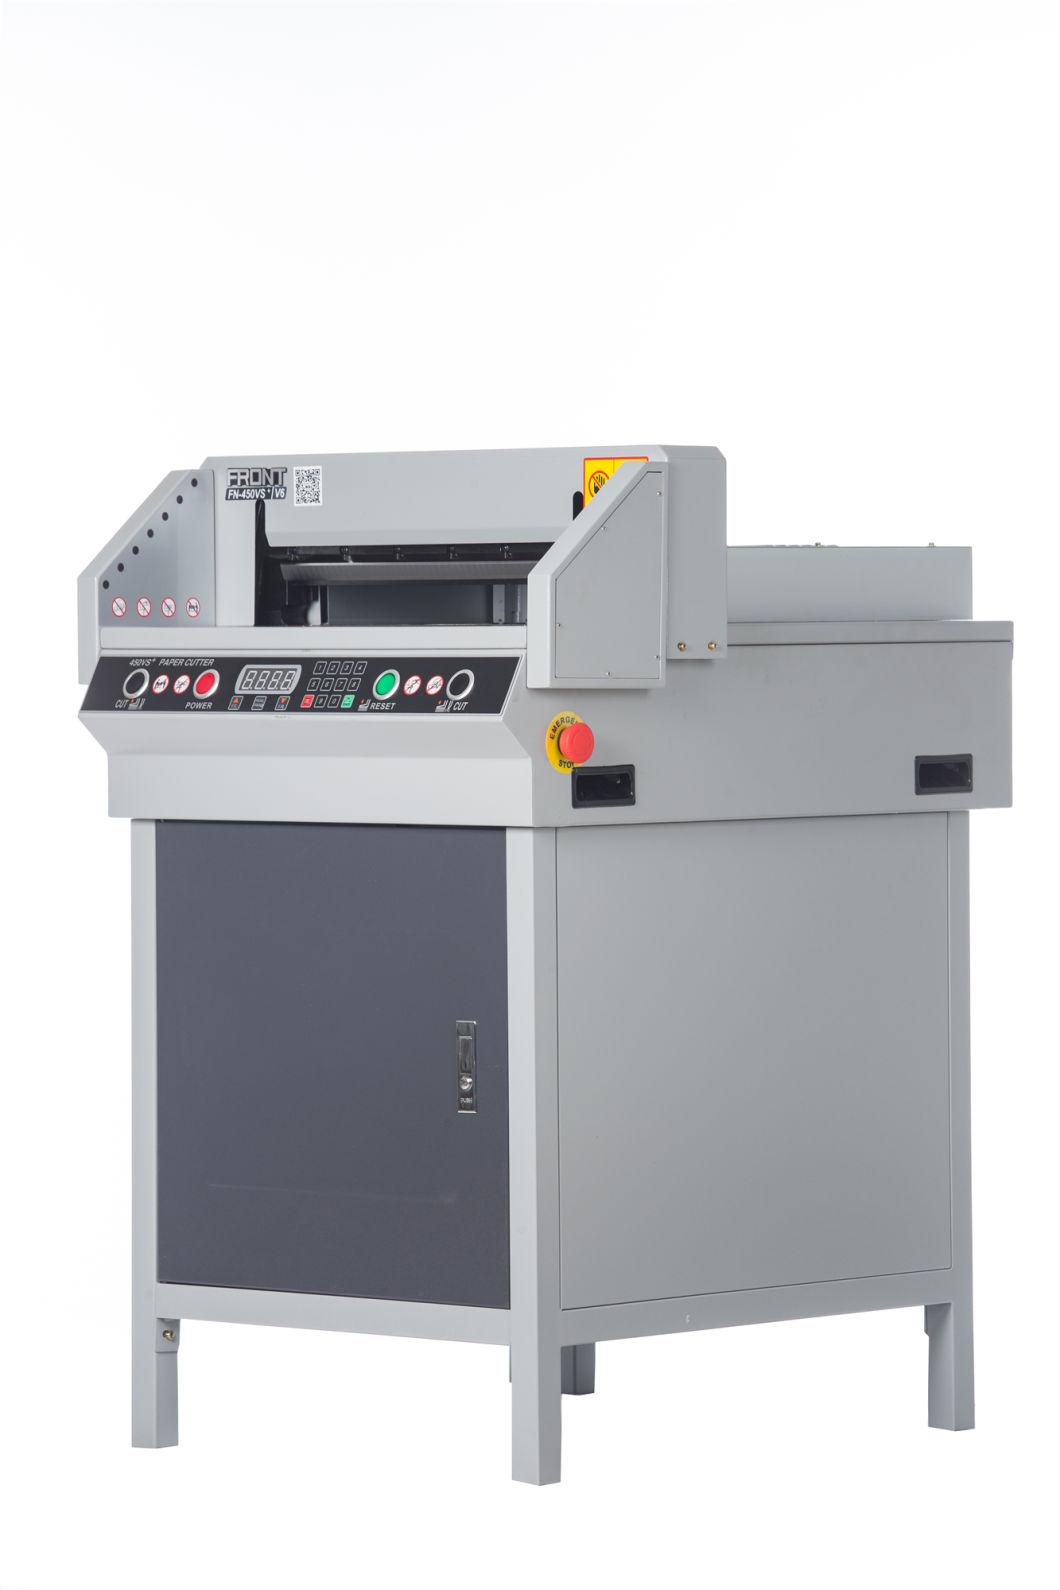 G450vs+ Front Programmable High Speed Paper Cutter 450mm